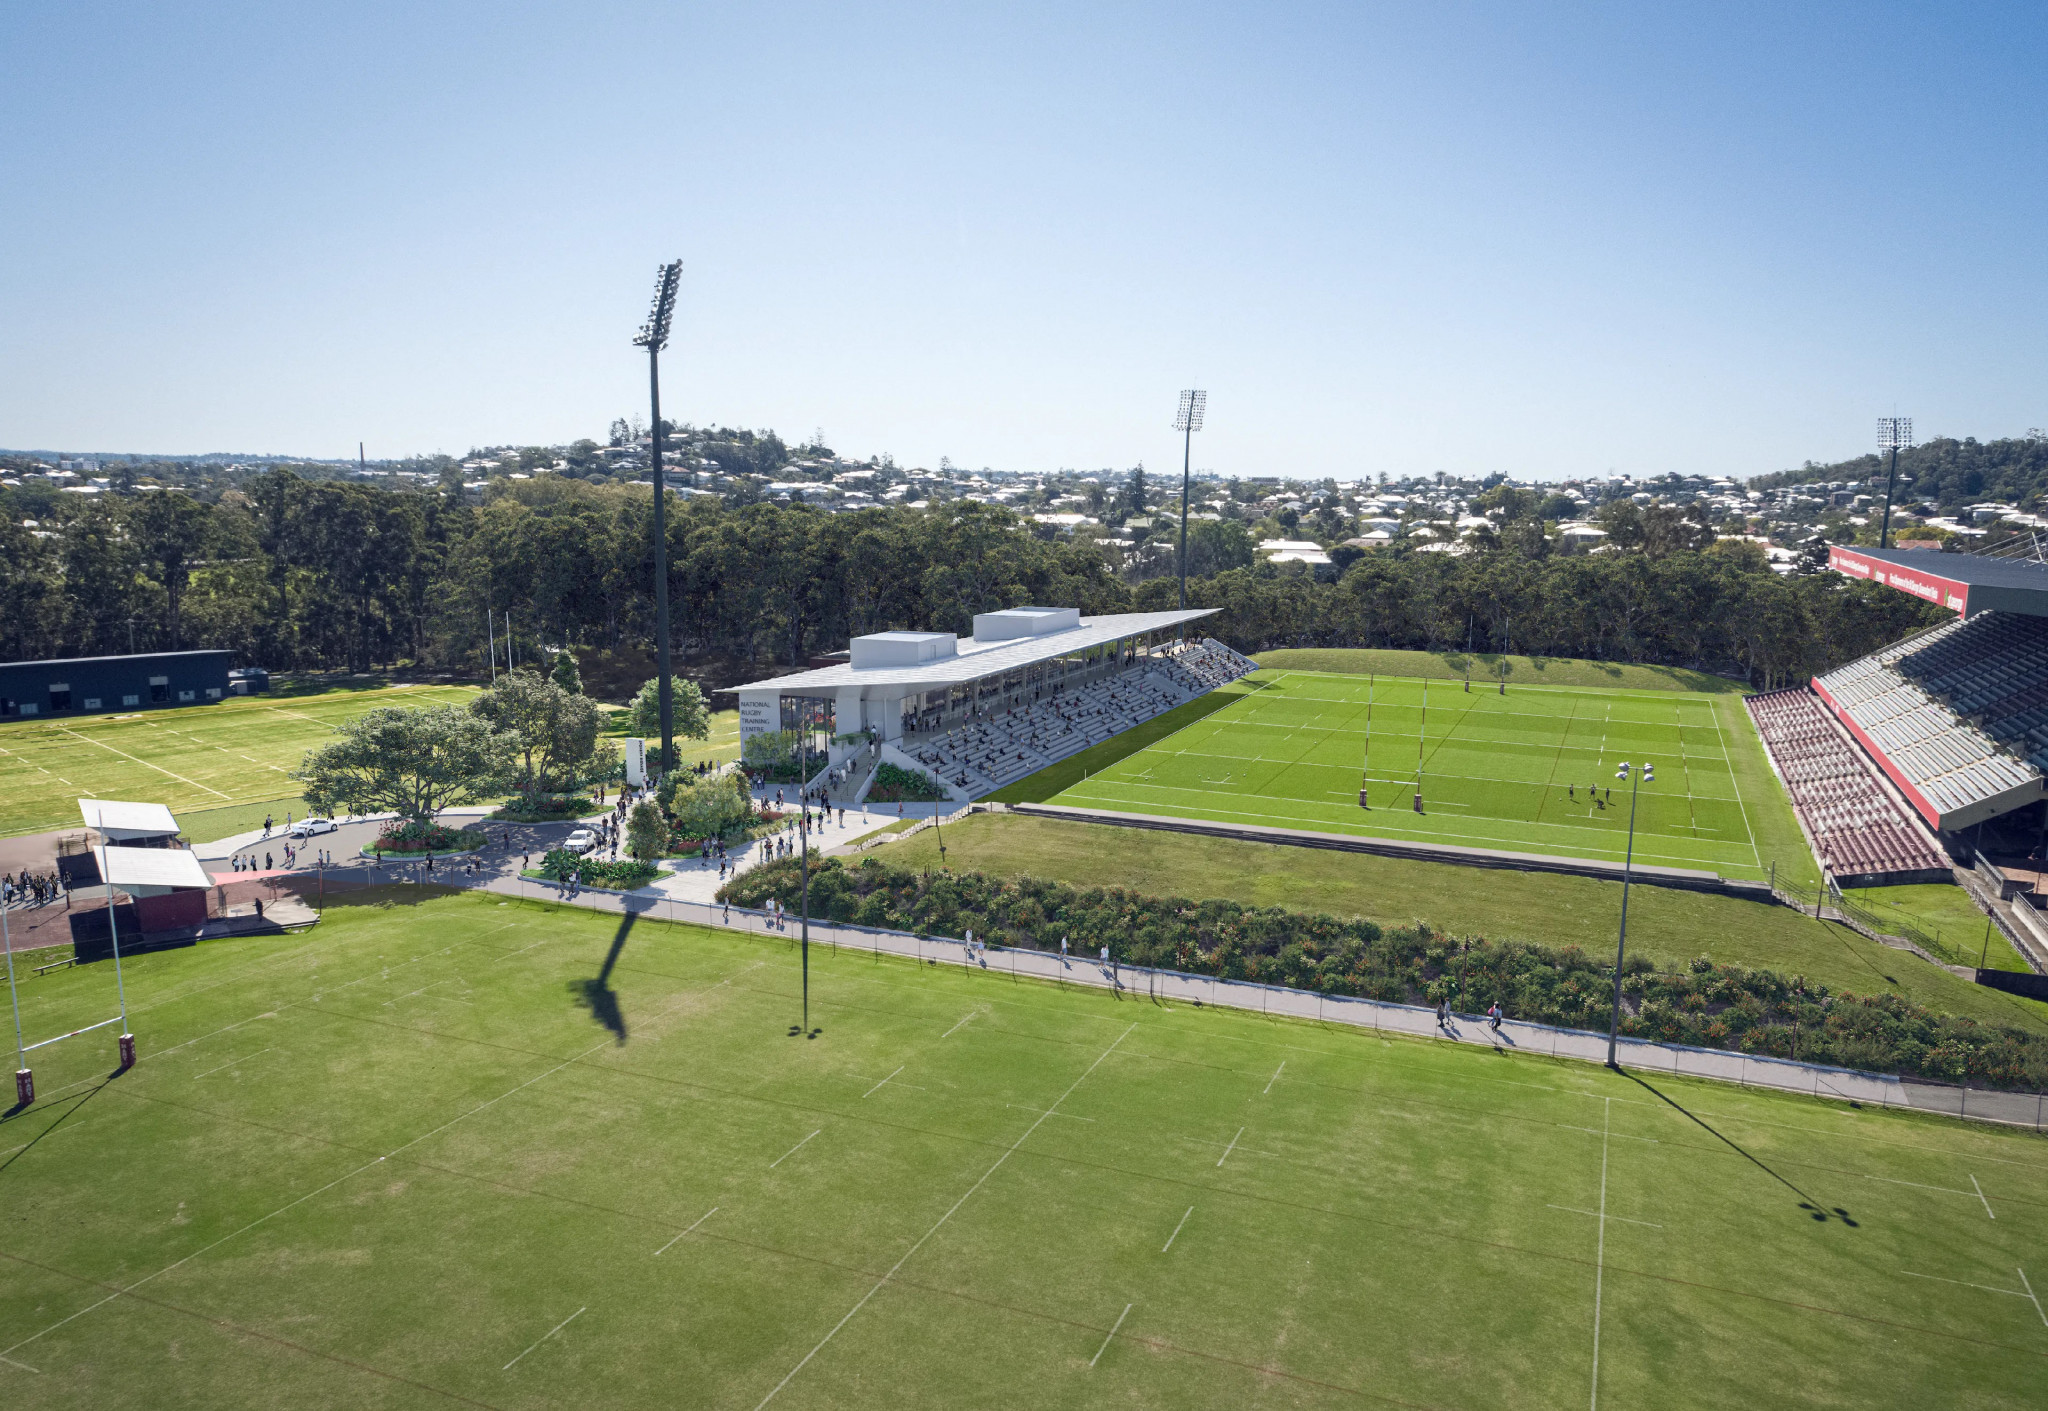 The rugby union stadium in Herston, selected to host Olympic hockey events in 2032, is undergoing renovations ©Queensland Rugby Union